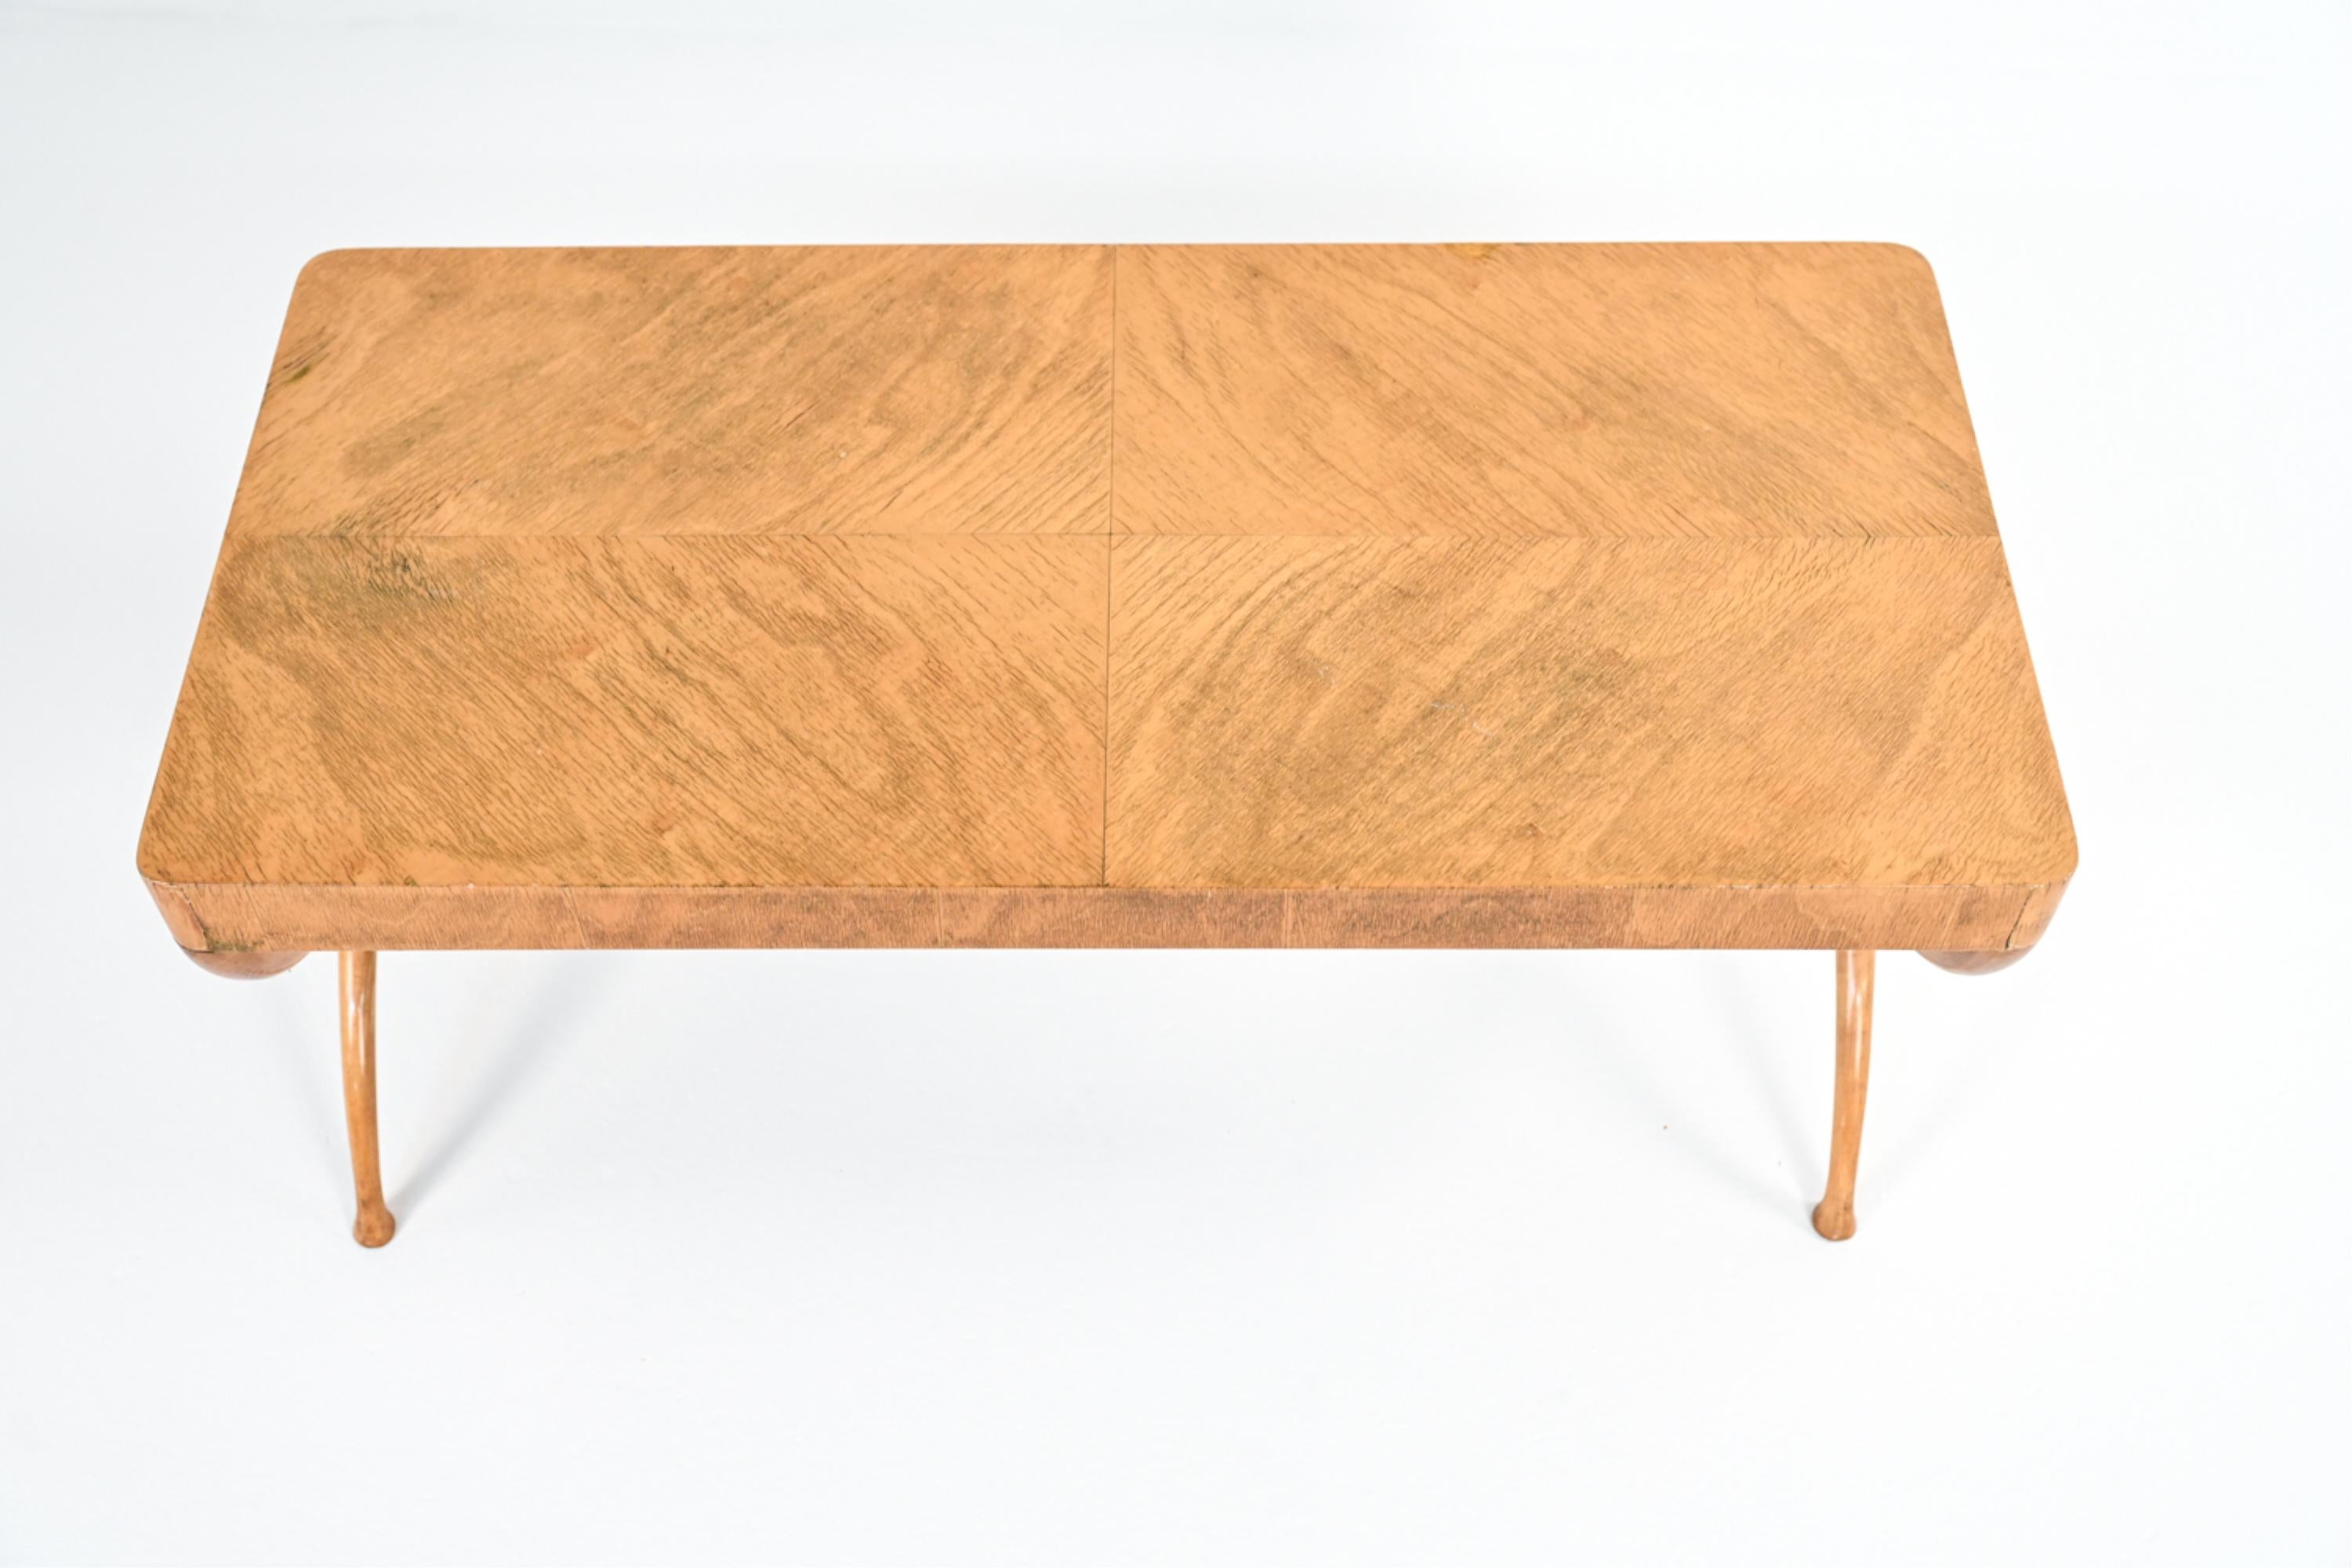 Italian Manner of Tomaso Buzzi 1940's Coffee Table For Sale